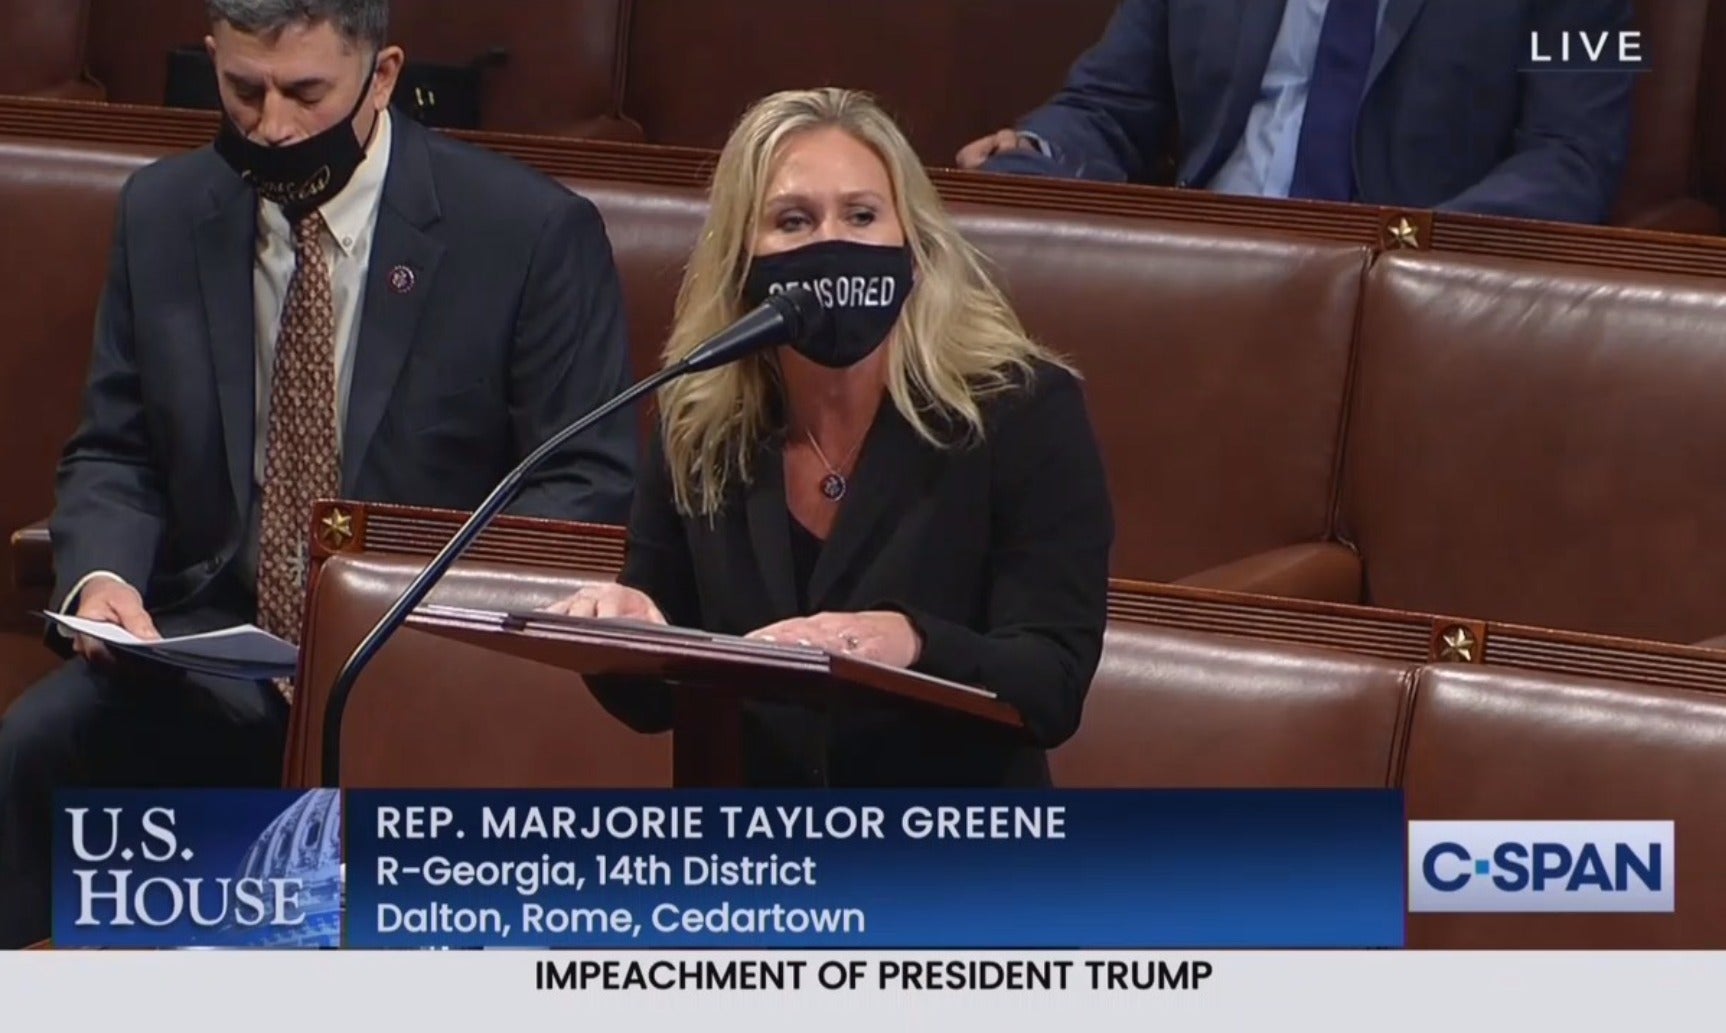 Marjorie Taylor Green mocked for wearing a mask saying ‘censored’ while speaking to the nation on live TV